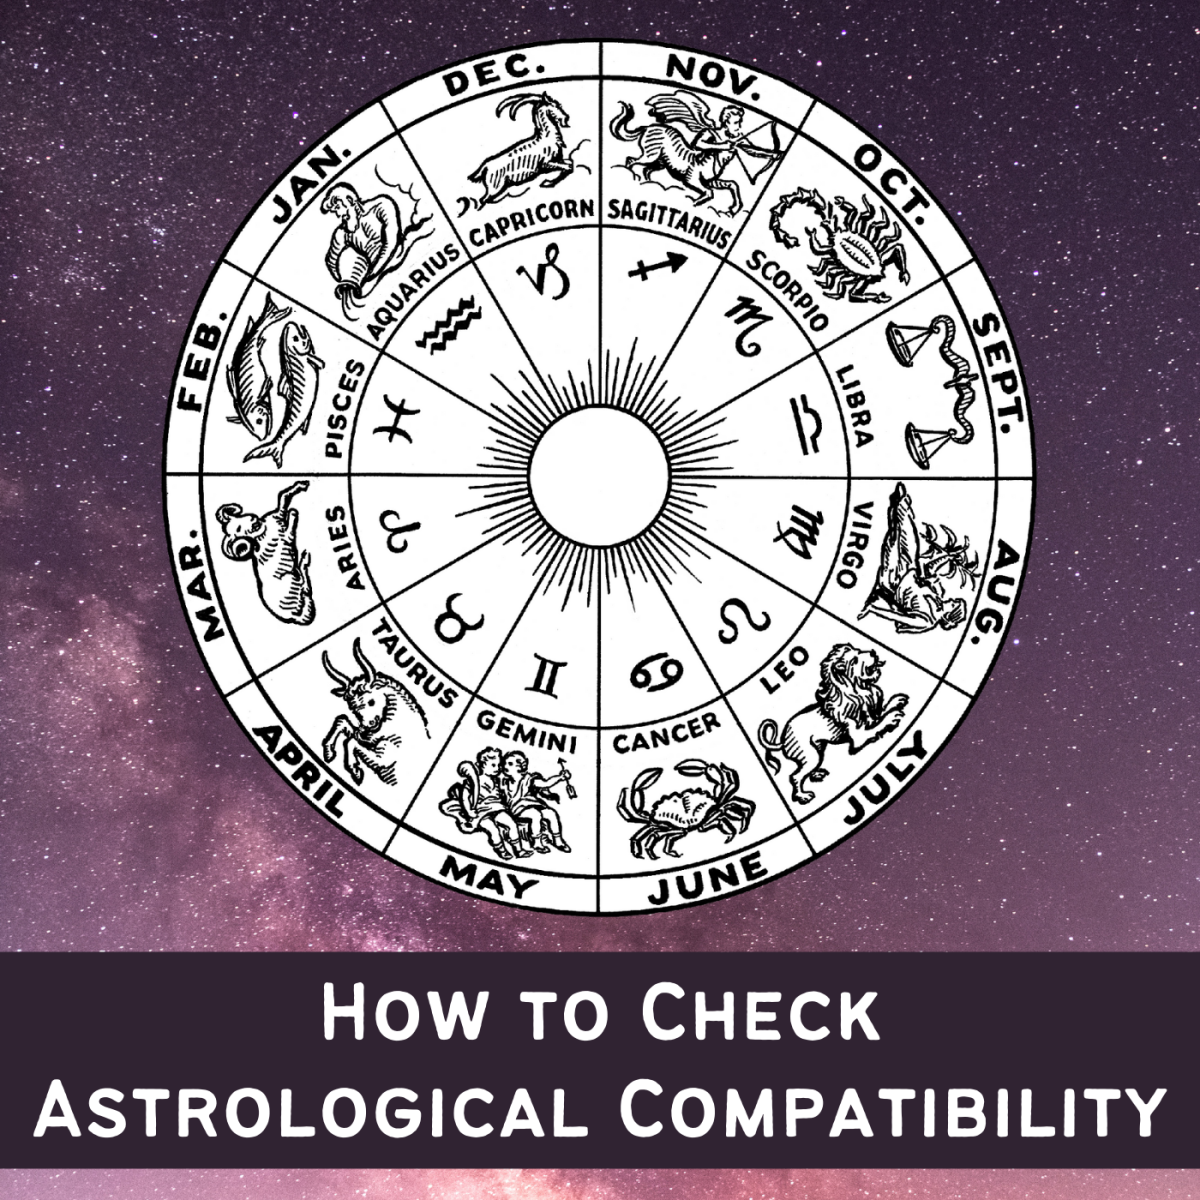 How to Determine Compatibility Using Astrology